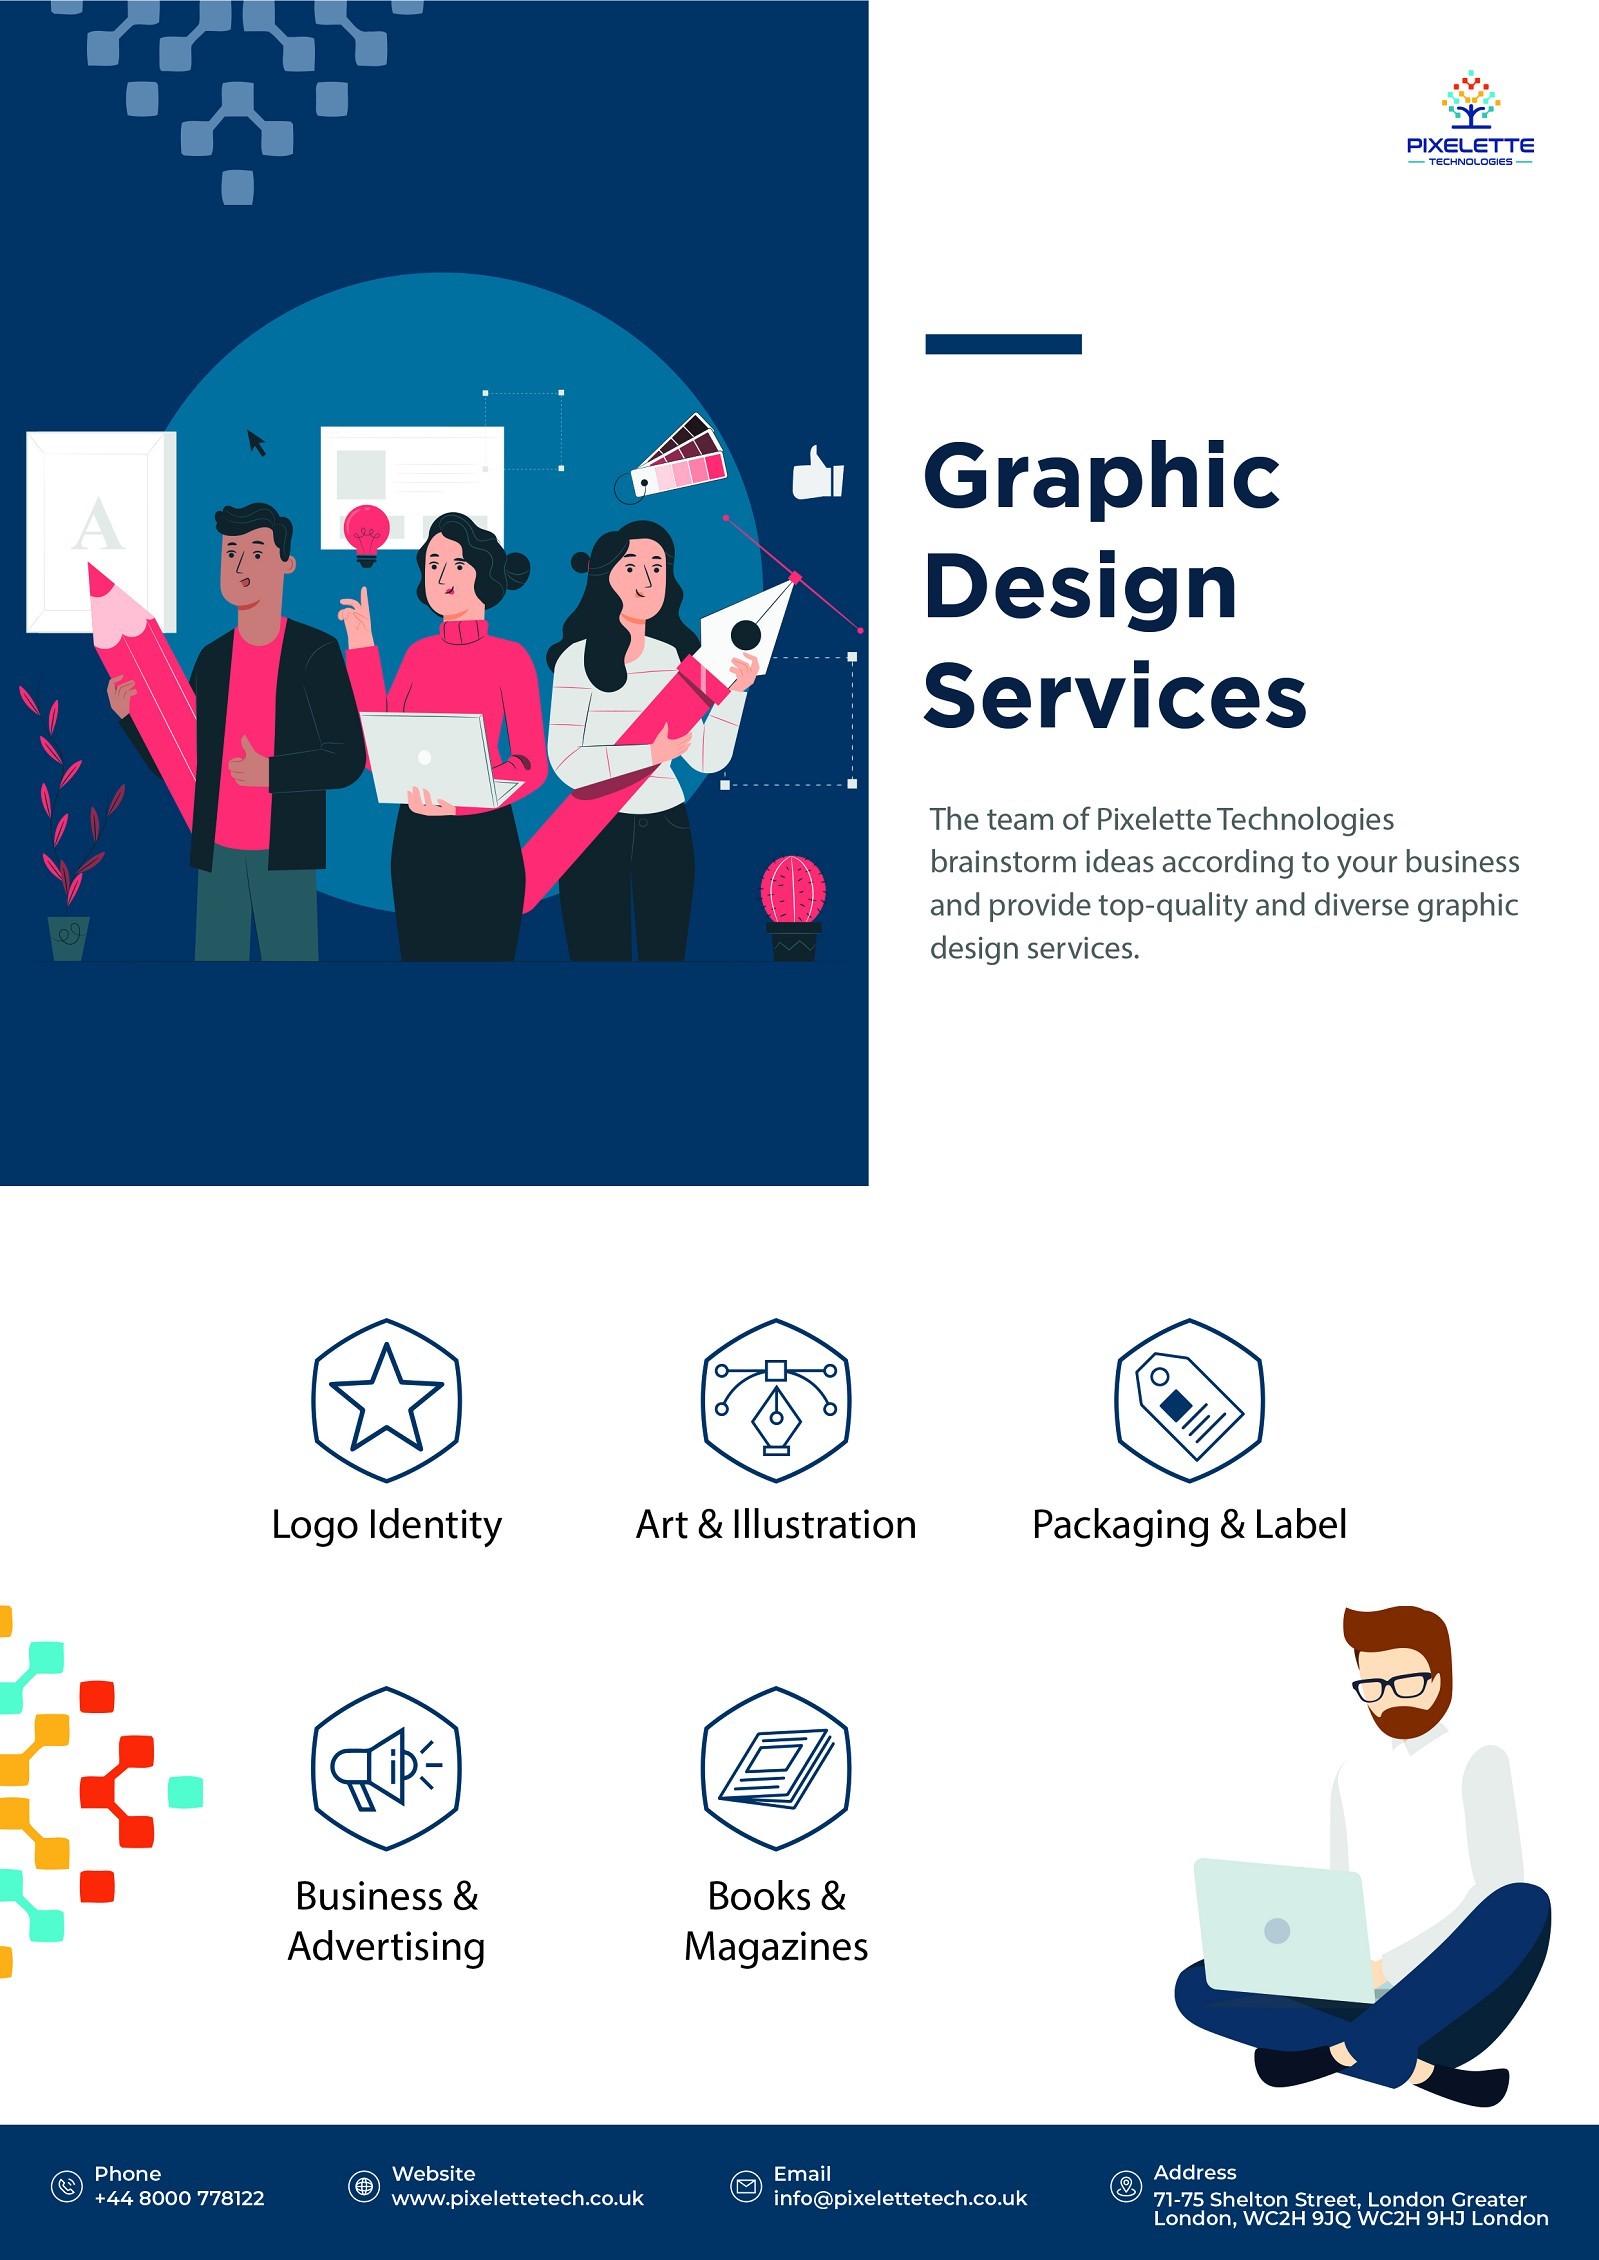 Are you looking for exceptional graphic design services?